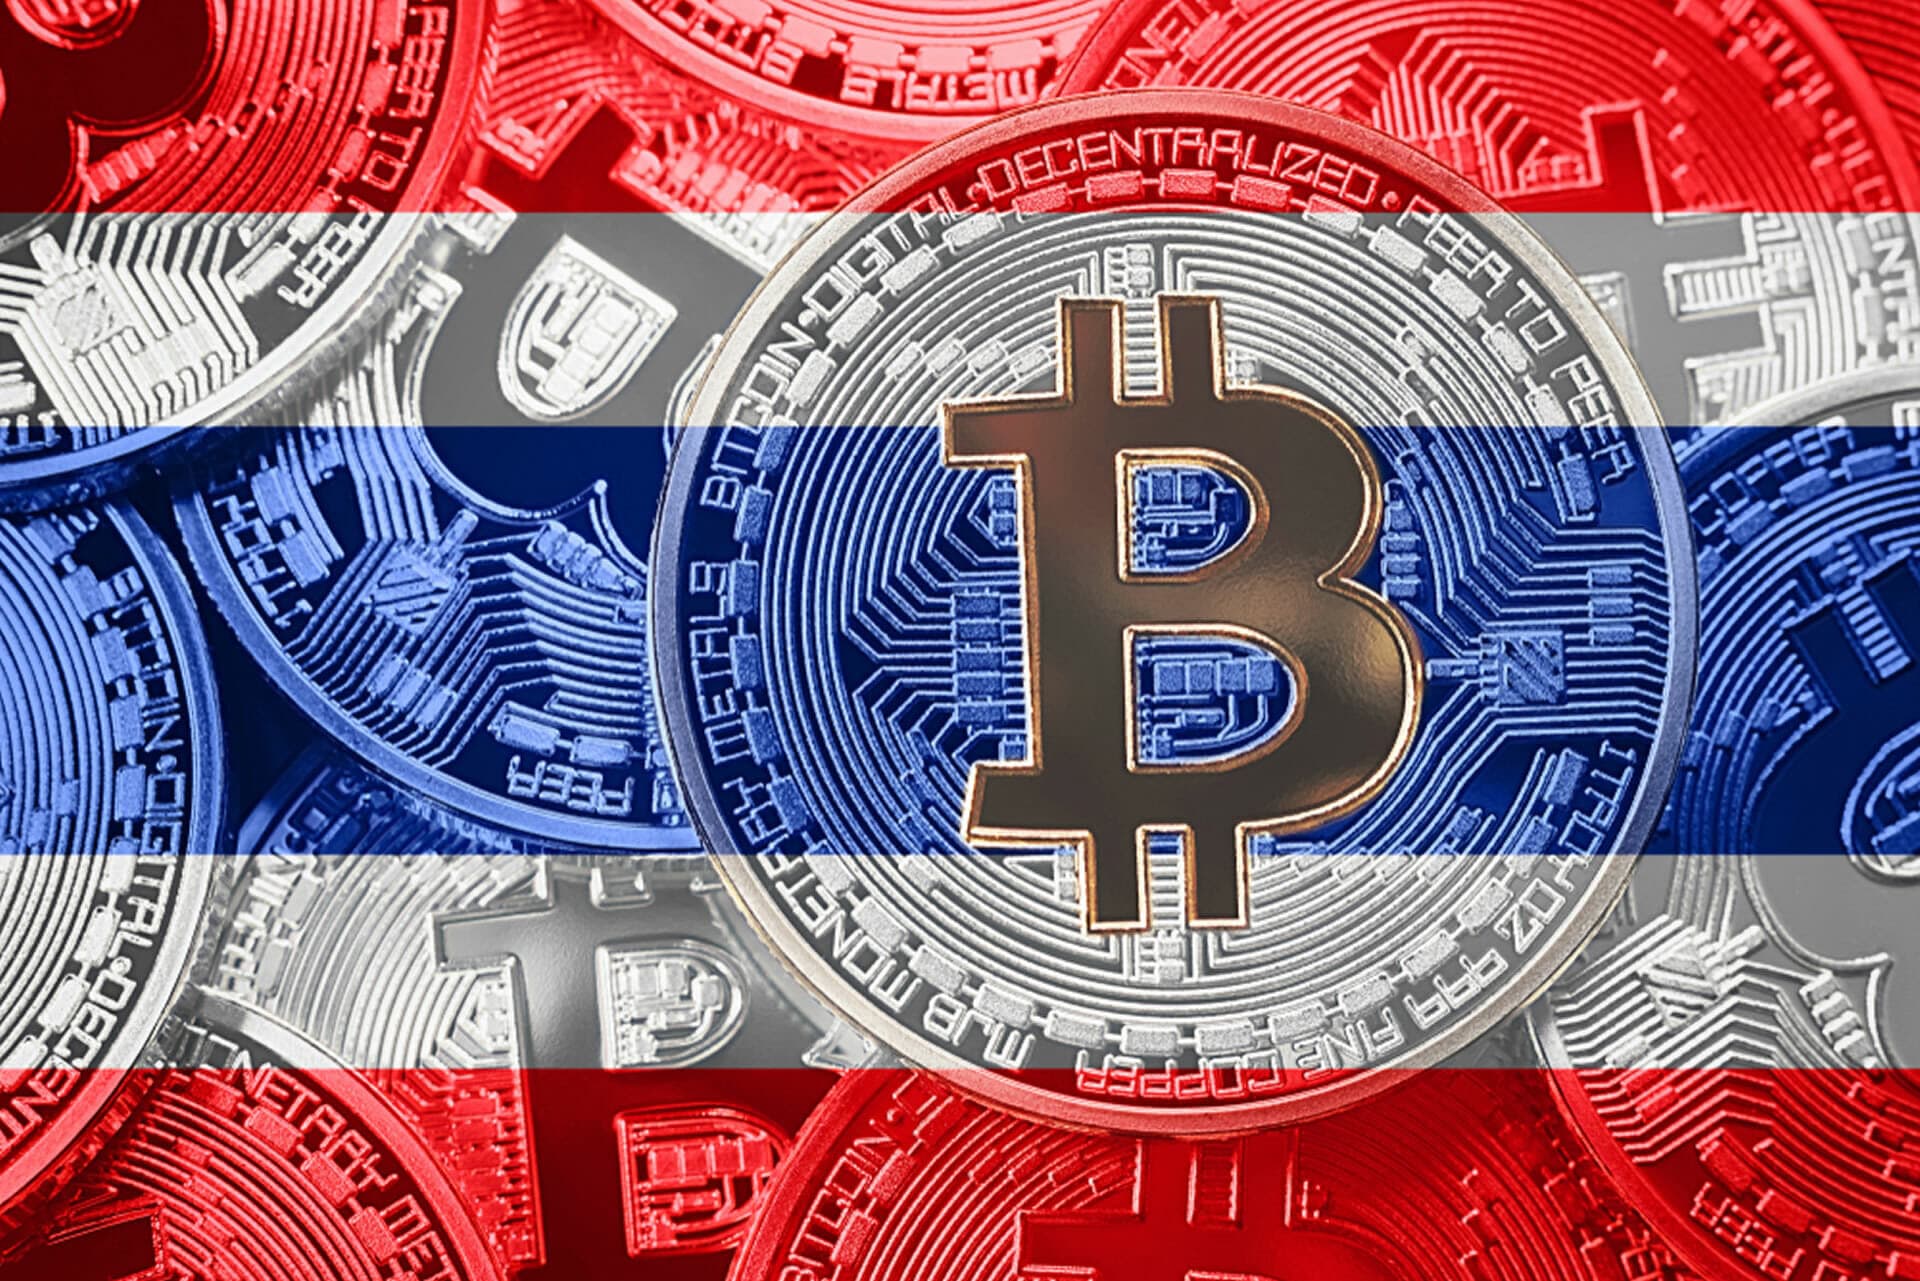 Thailand's SEC Intensifies Action Against Misleading Cryptocurrency Advertisements